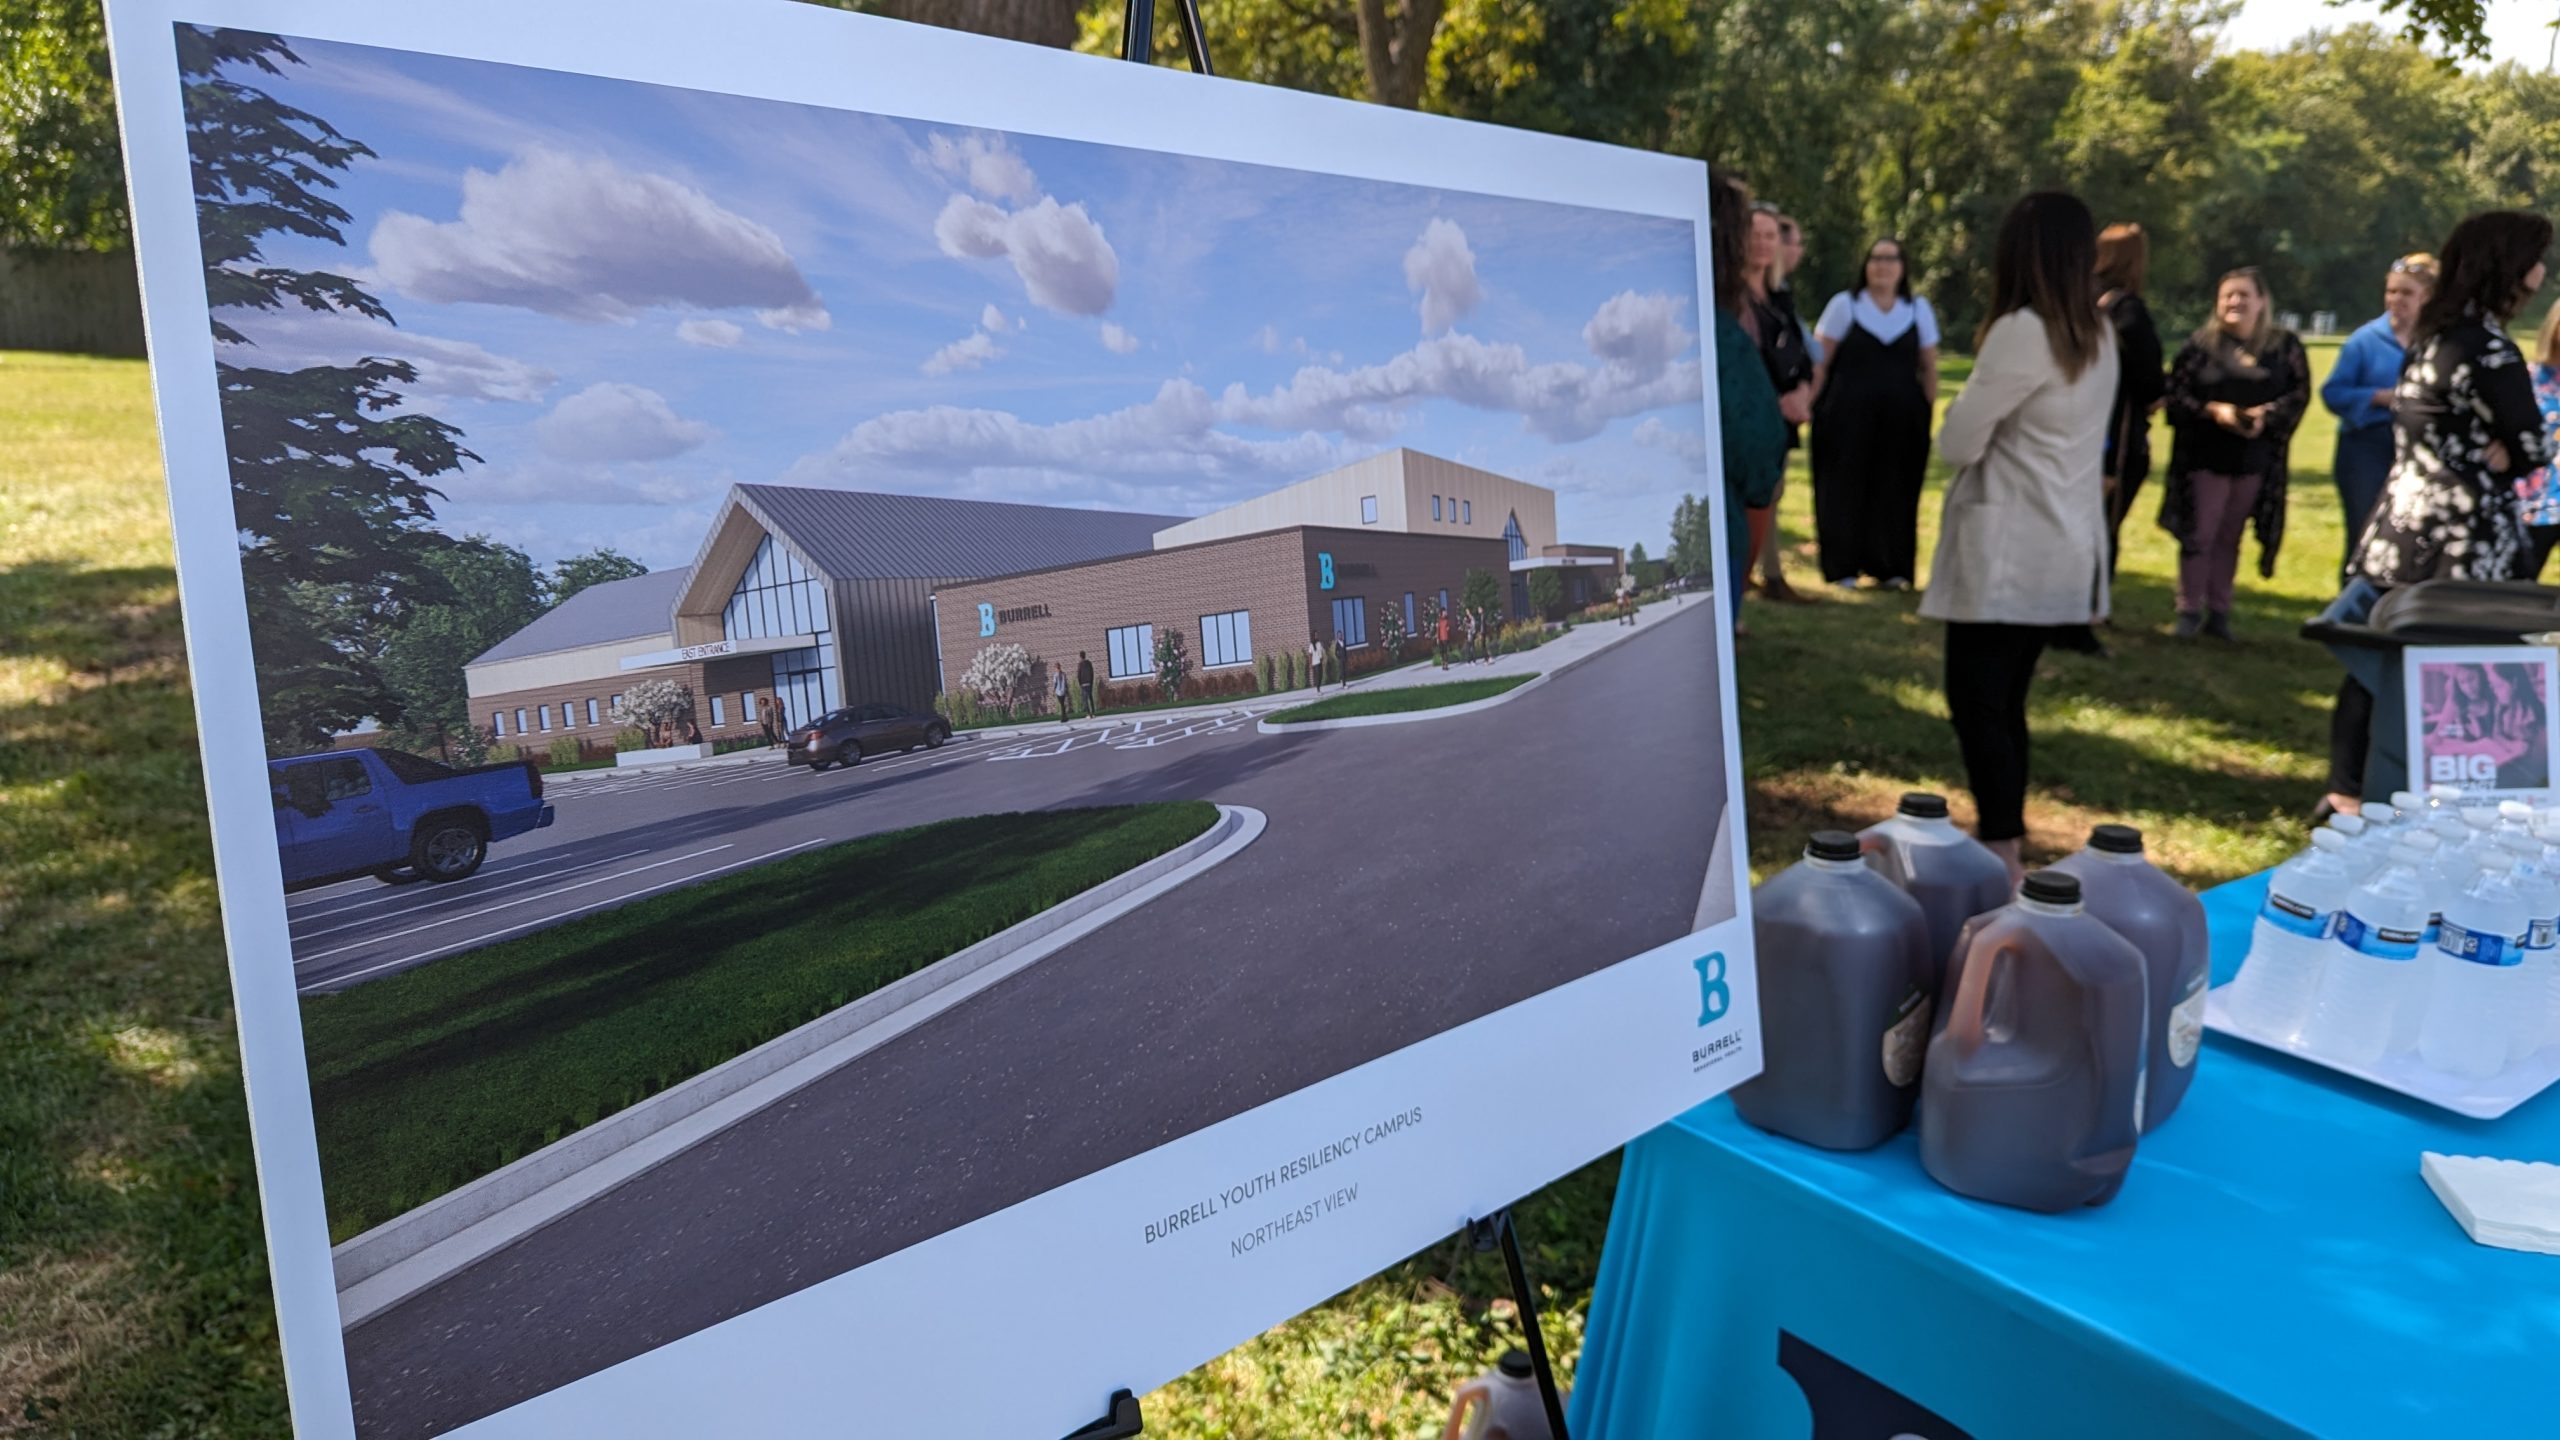 Ground broken for Burrell's youth crisis center that could be national model